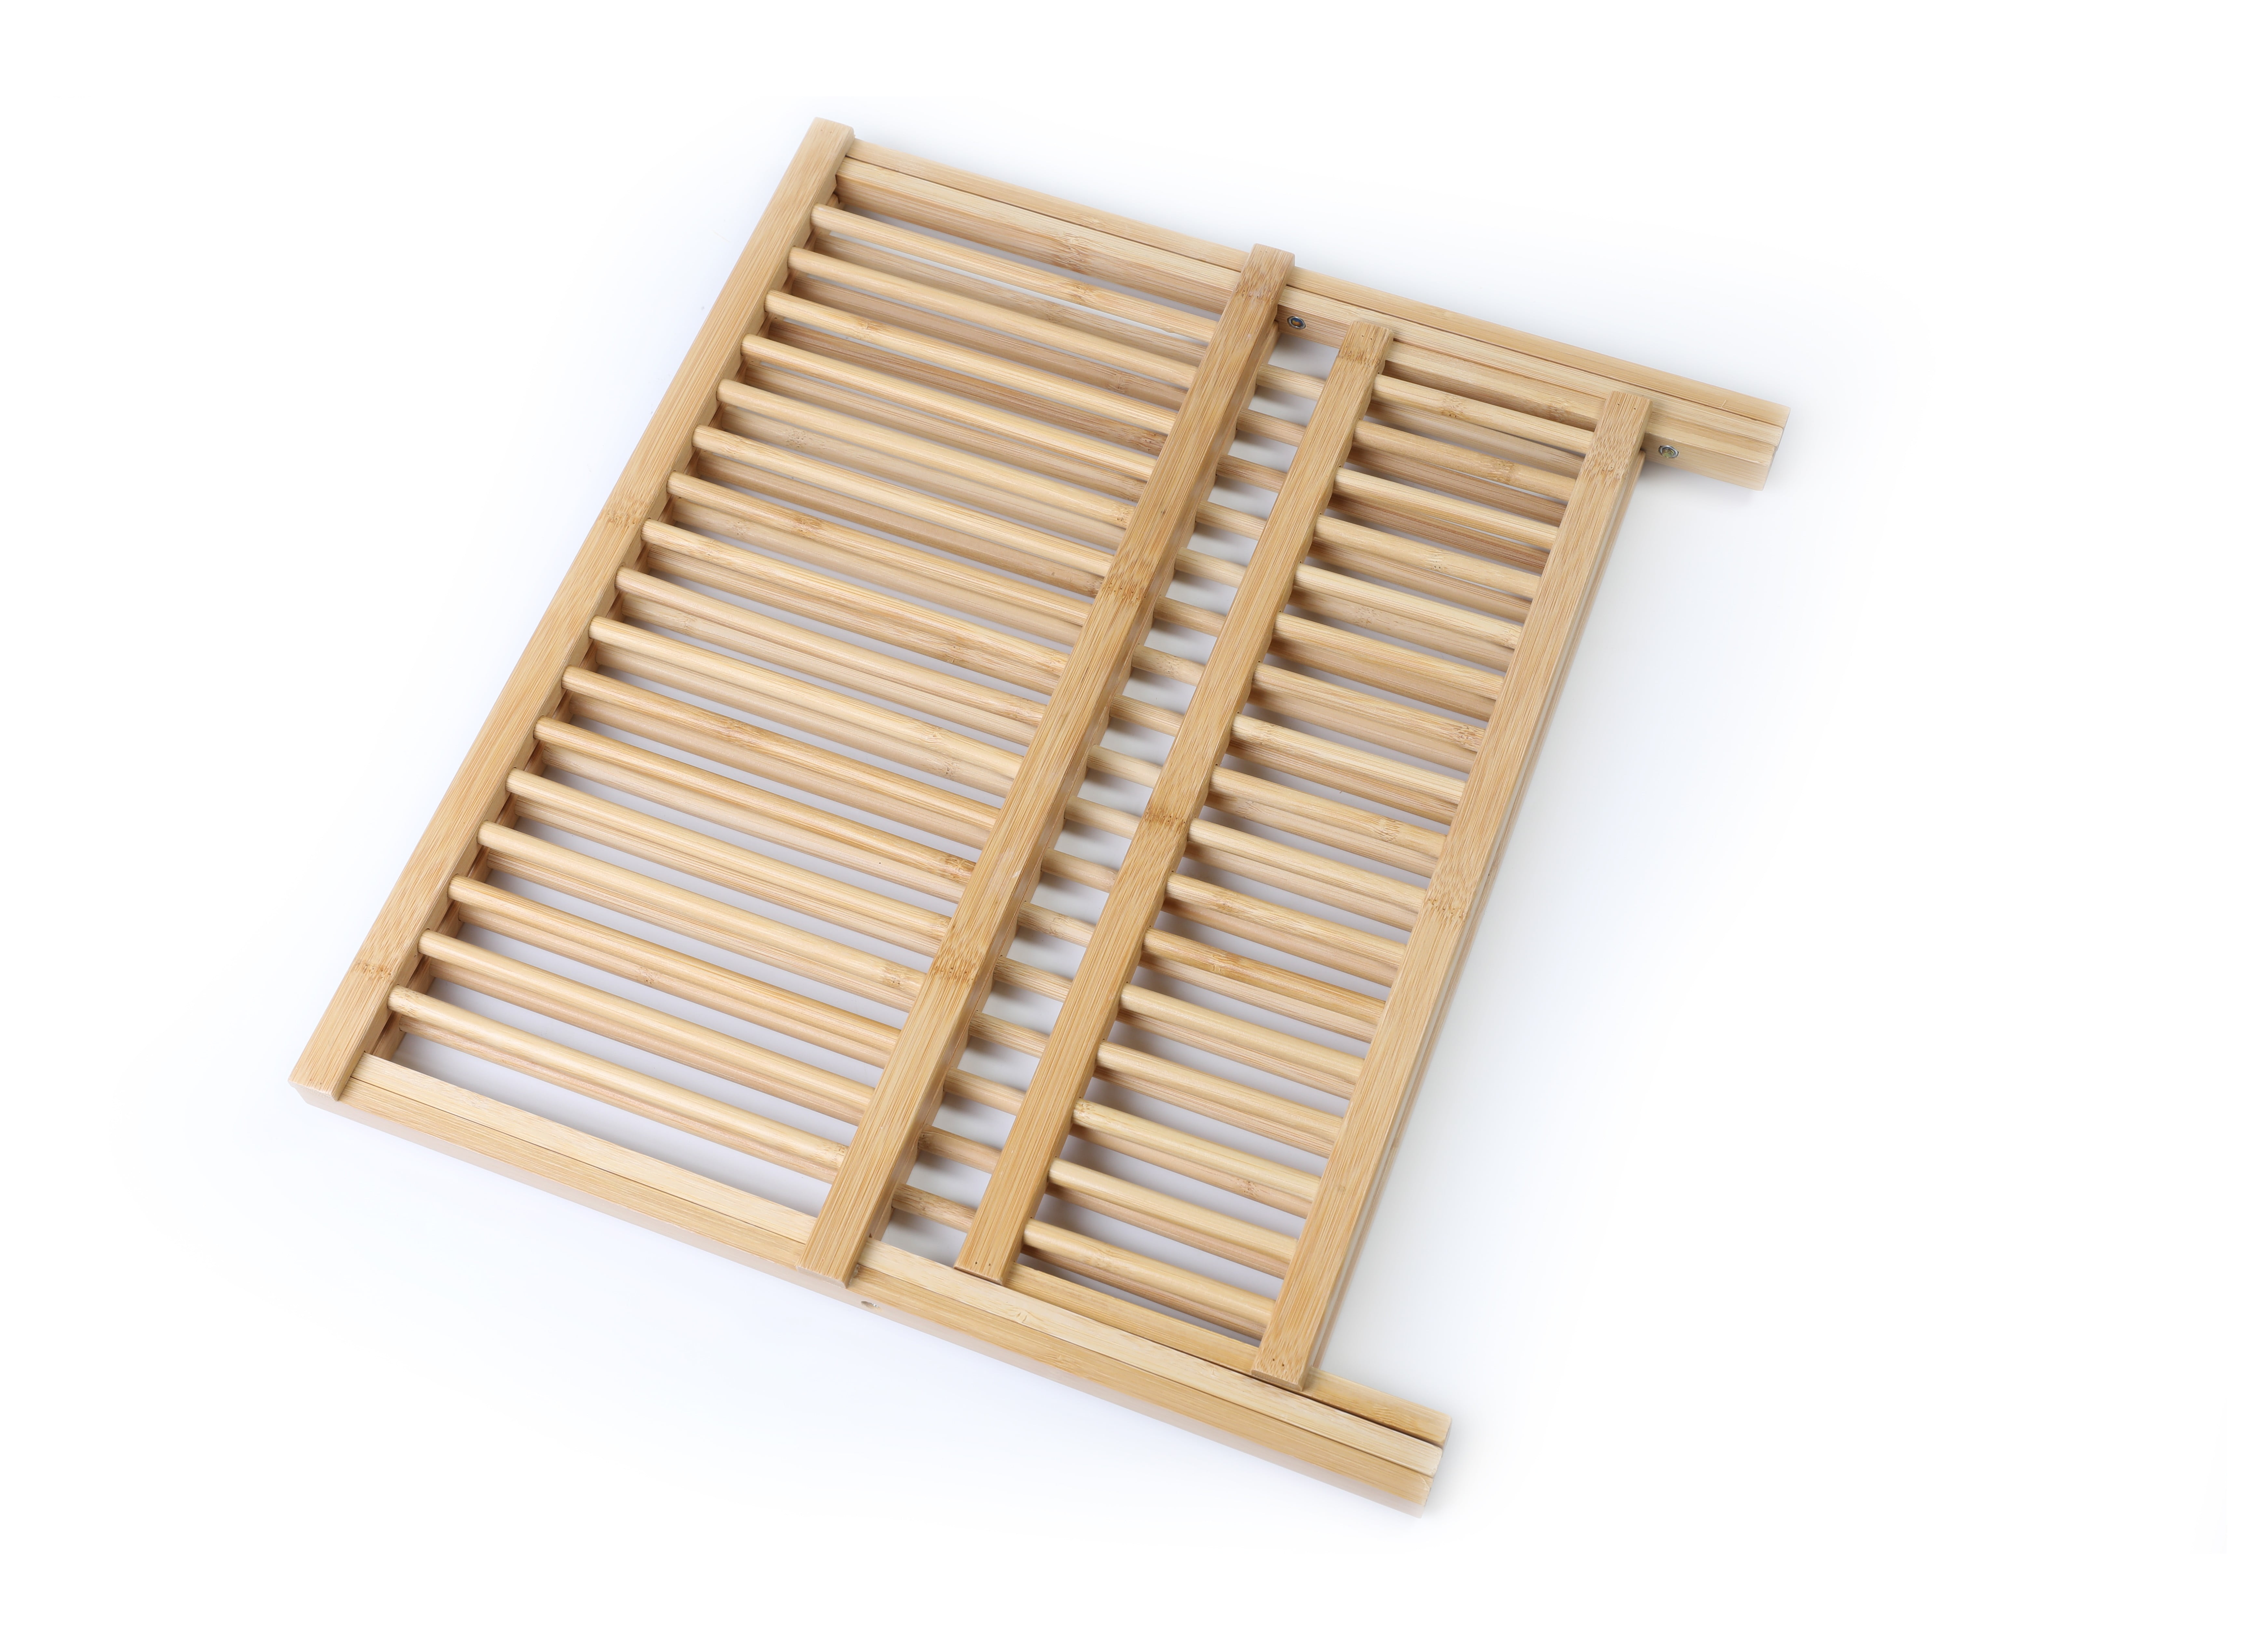 Hastings Home Dish Drying Rack- Folding Natural Bamboo Kitchen Essentials  Countertop Drainer and Organizer for Dinne…